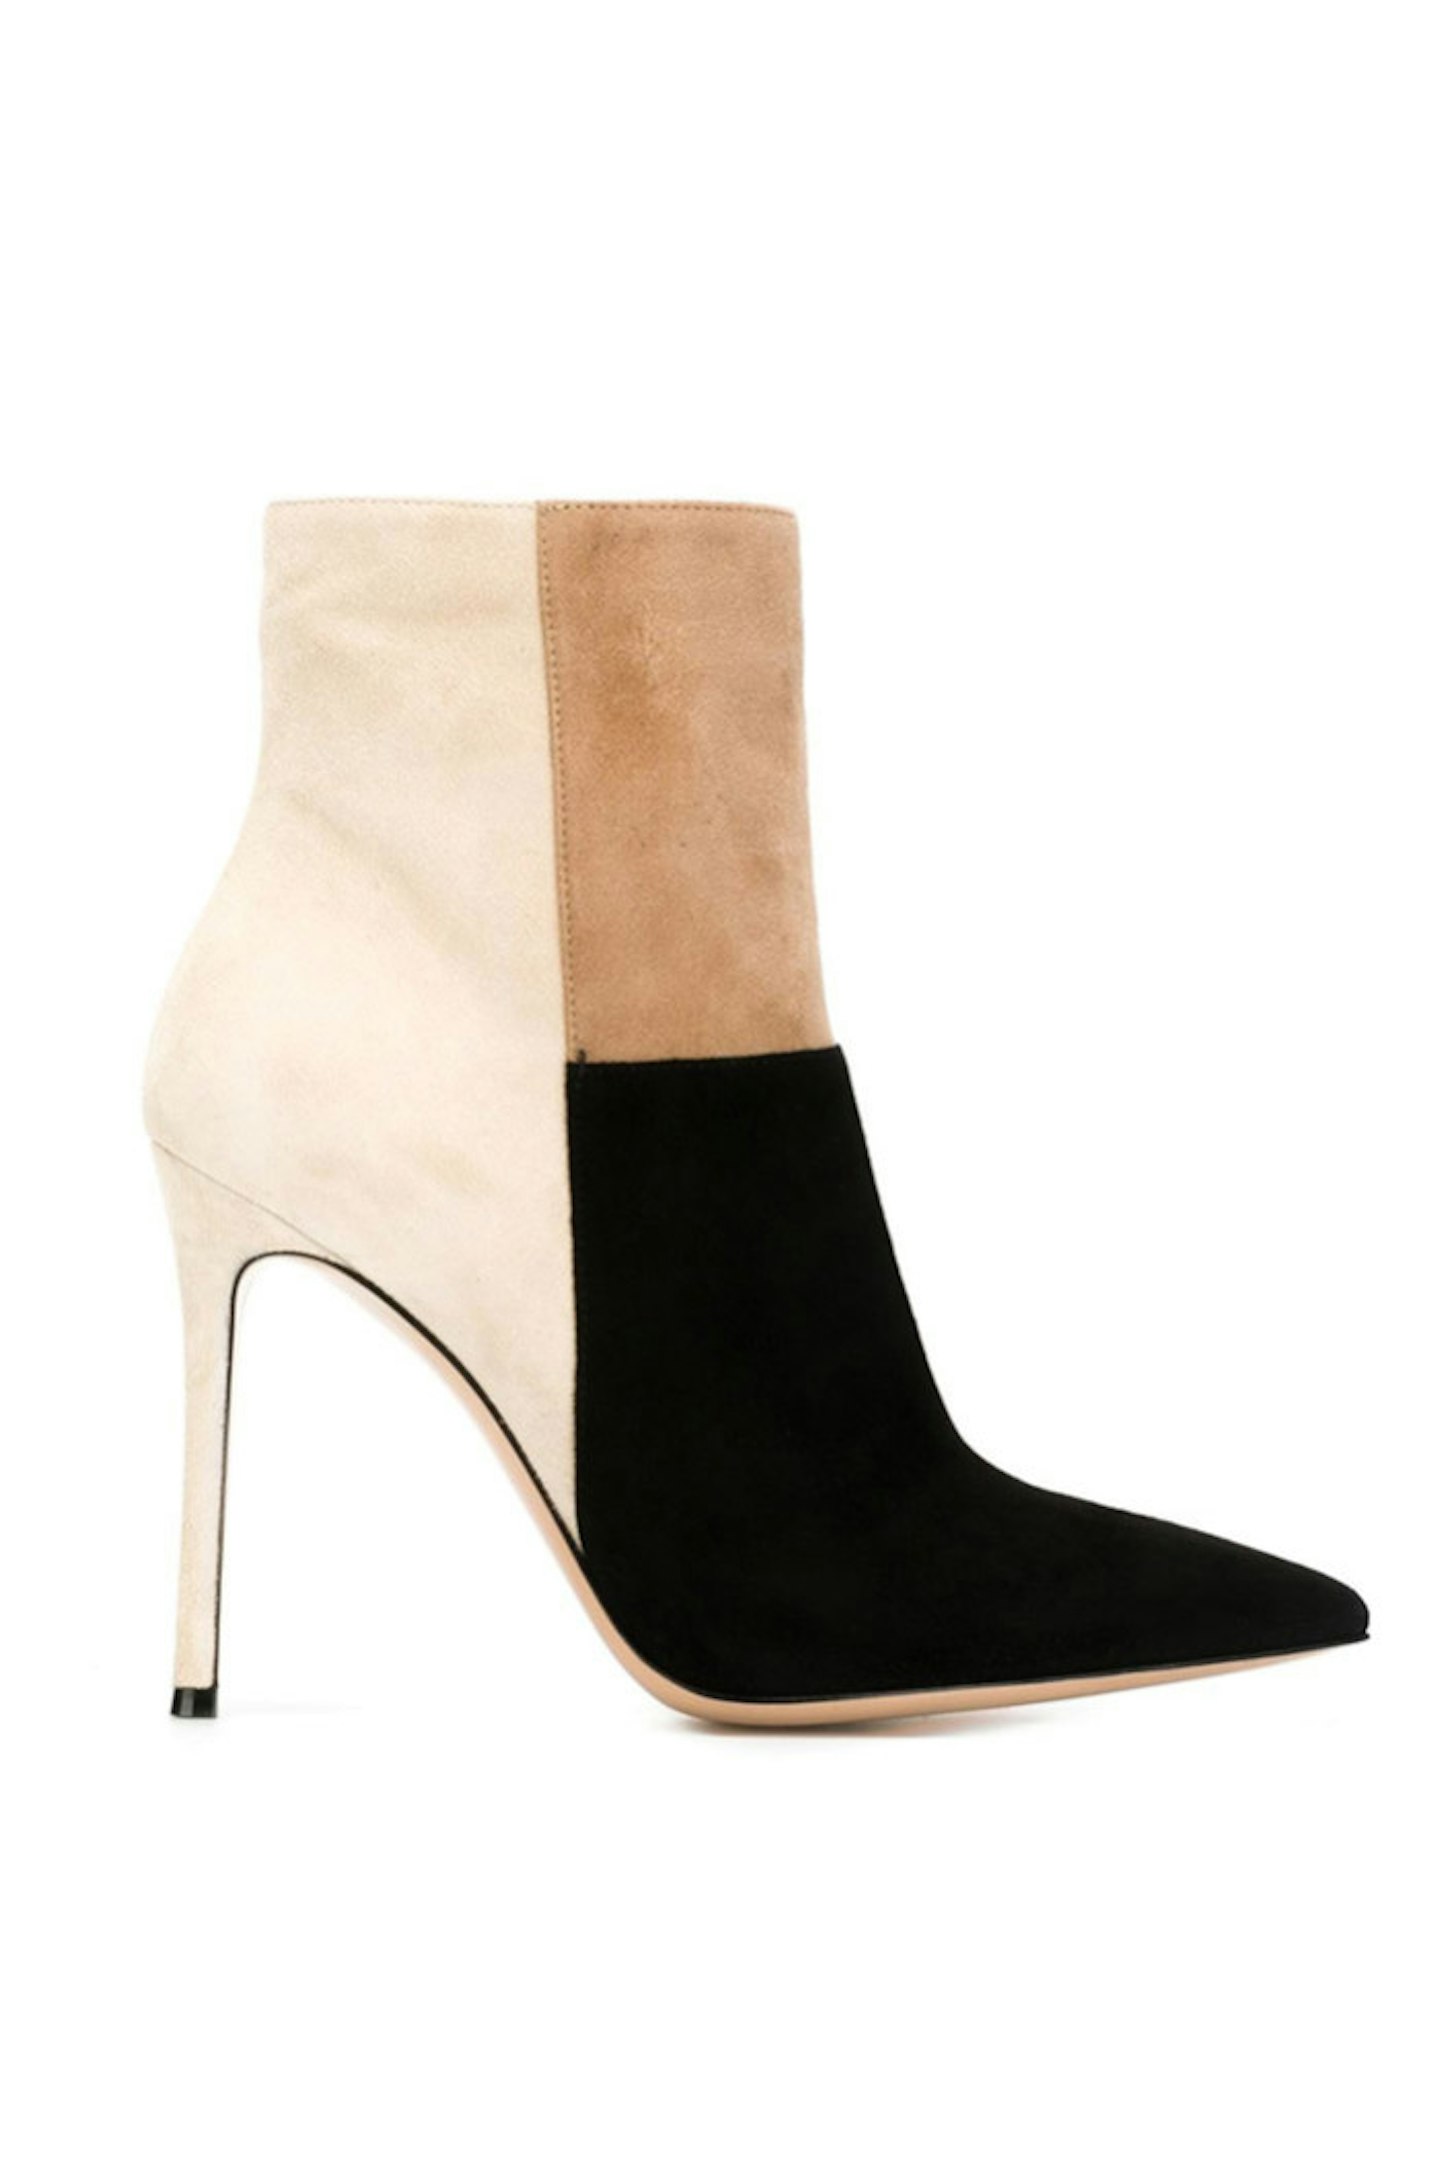 All hail the king of the heel. Trust Gianvito to come up with our favorite of the bunch.